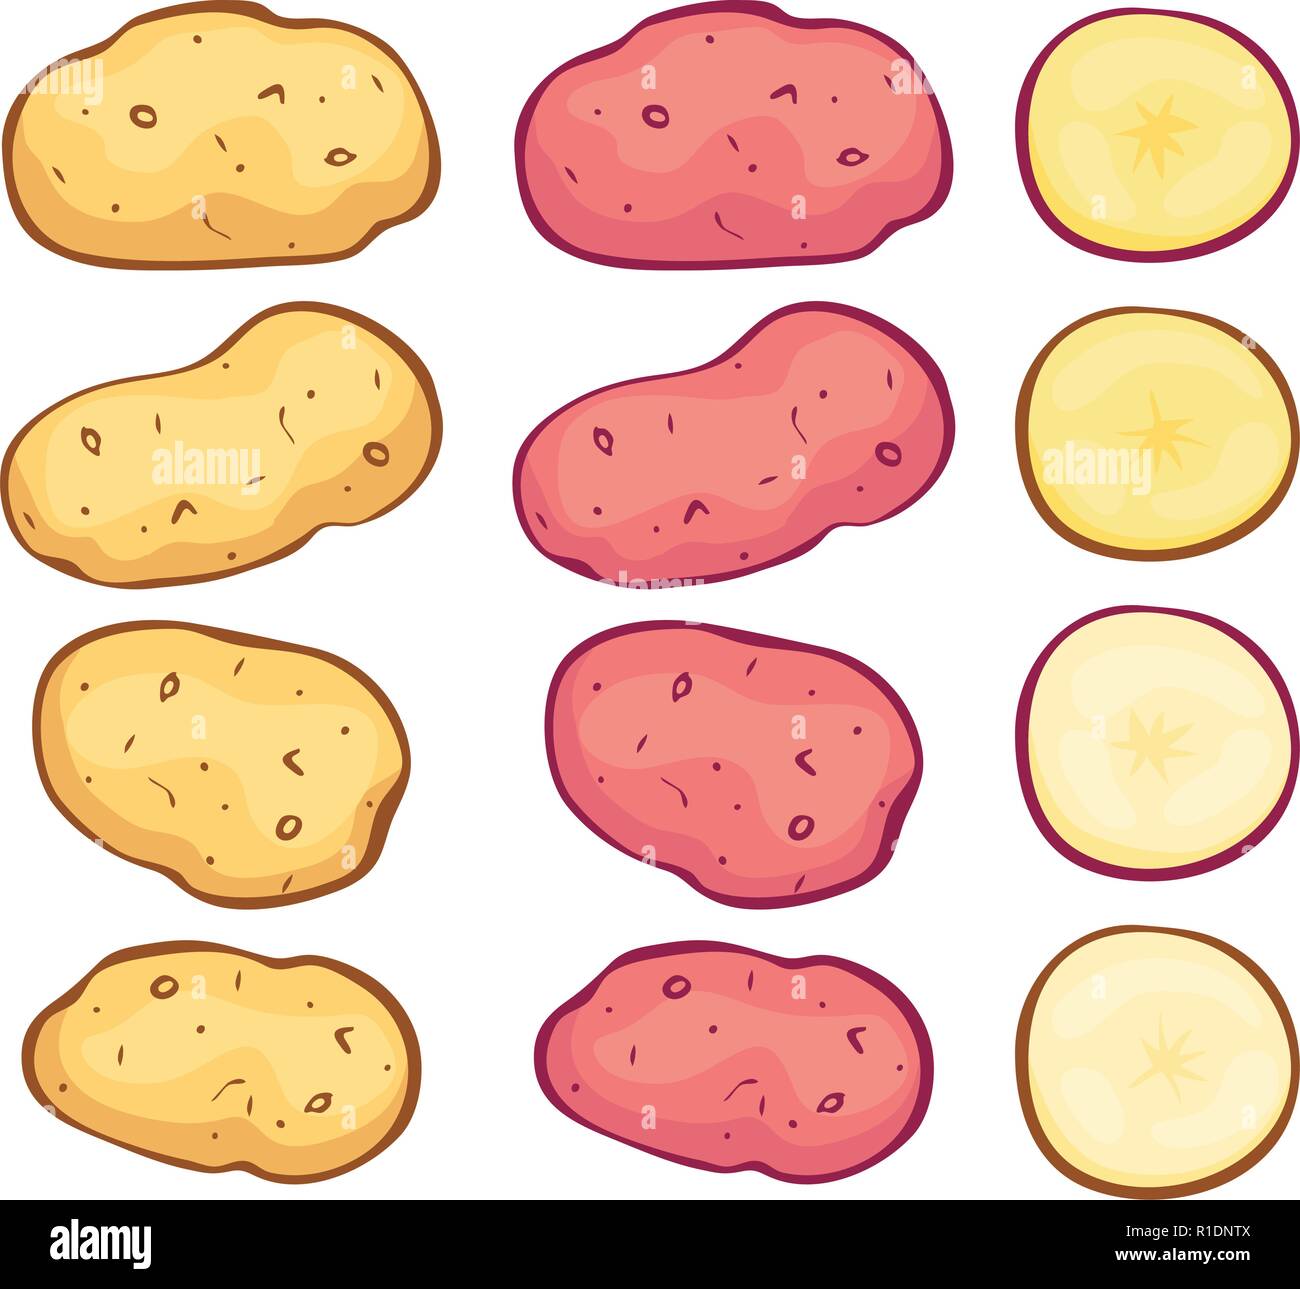 vector whole potatoes and potato cuts isolated on white background. organic vegetarian food symbols.  raw uncooked potatoes of yellow and pink colors Stock Vector